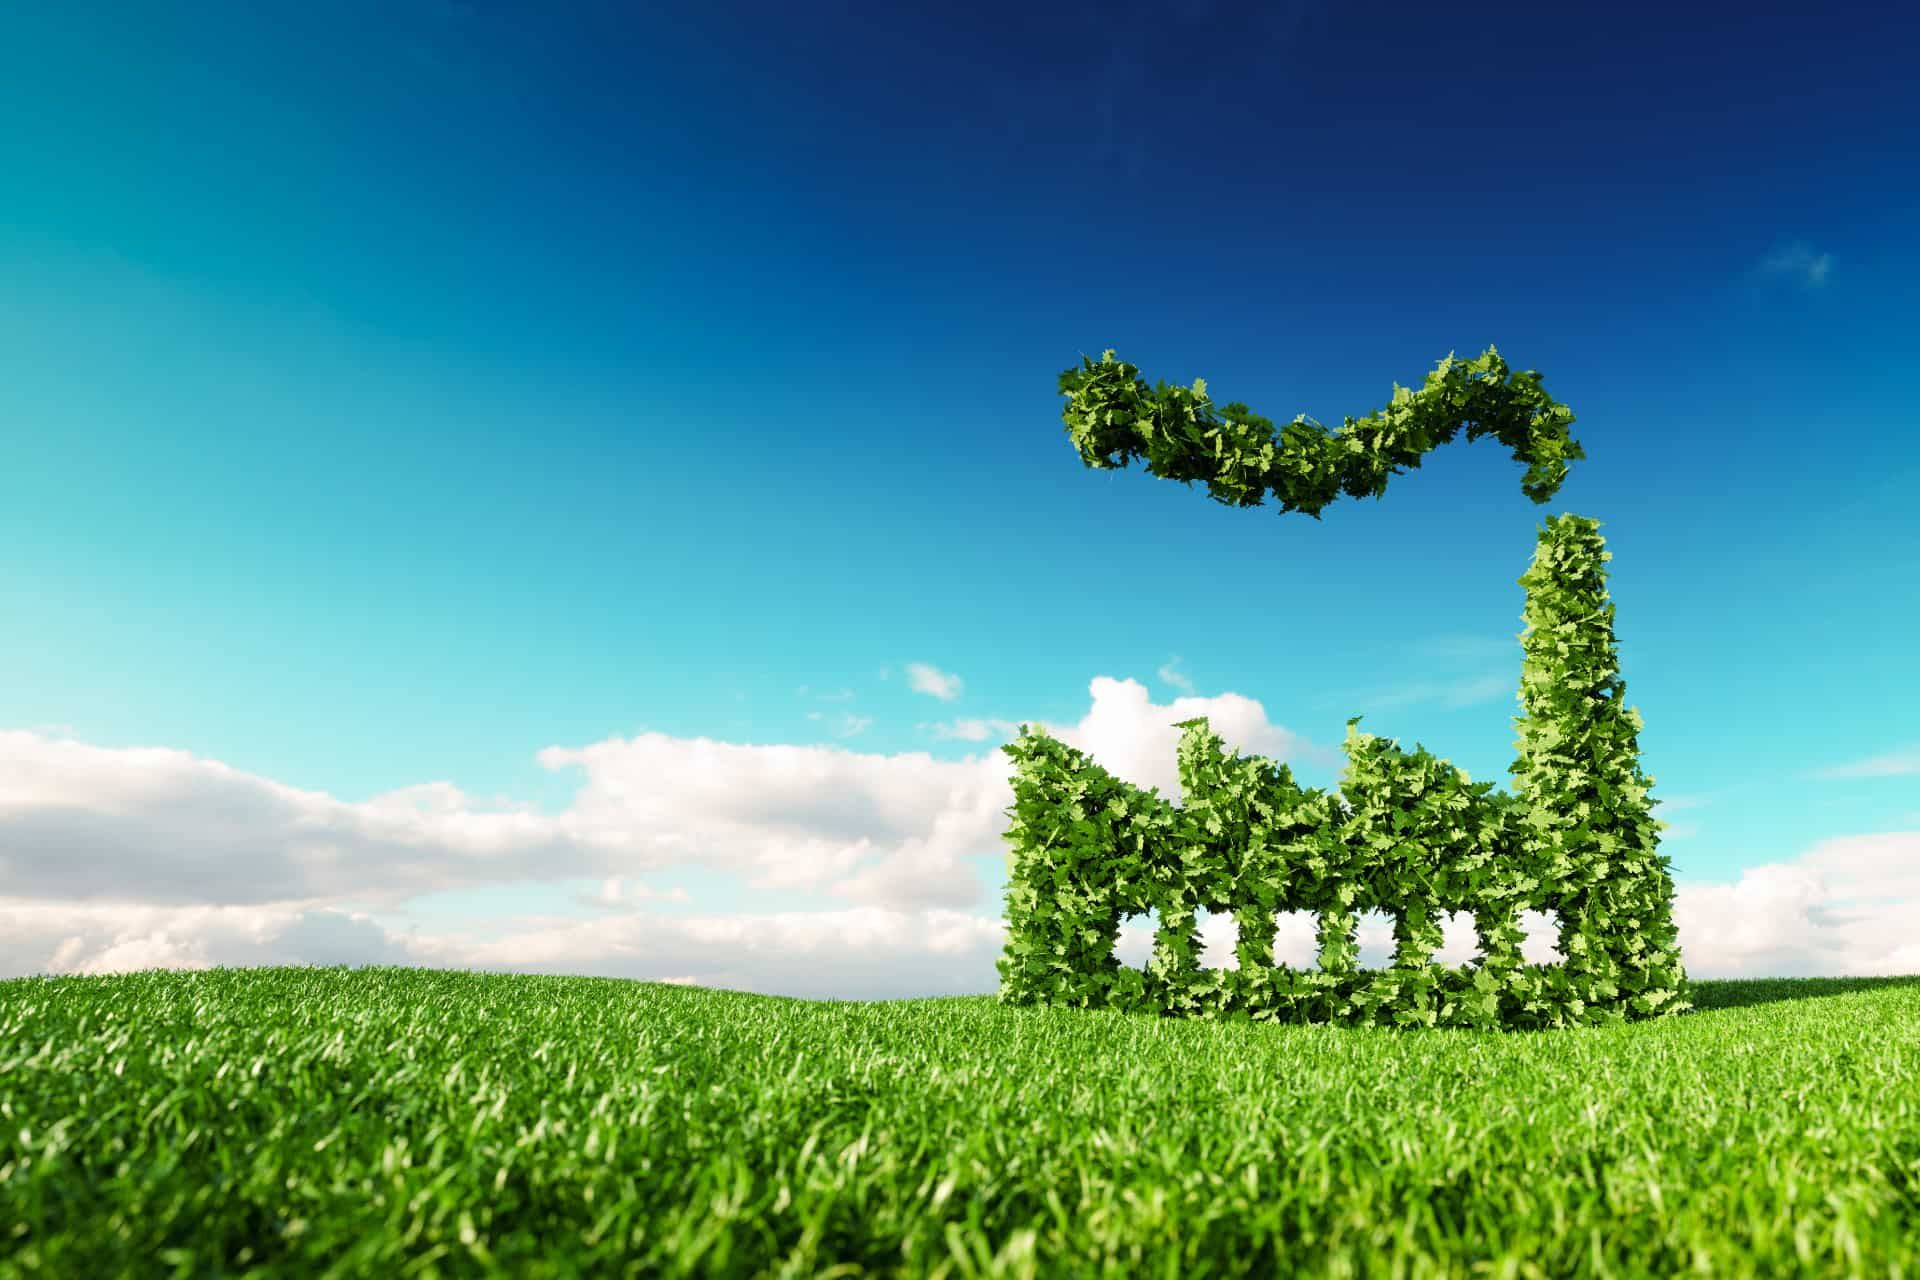 3 simple and cost-effective ways to improve sustainable manufacturing